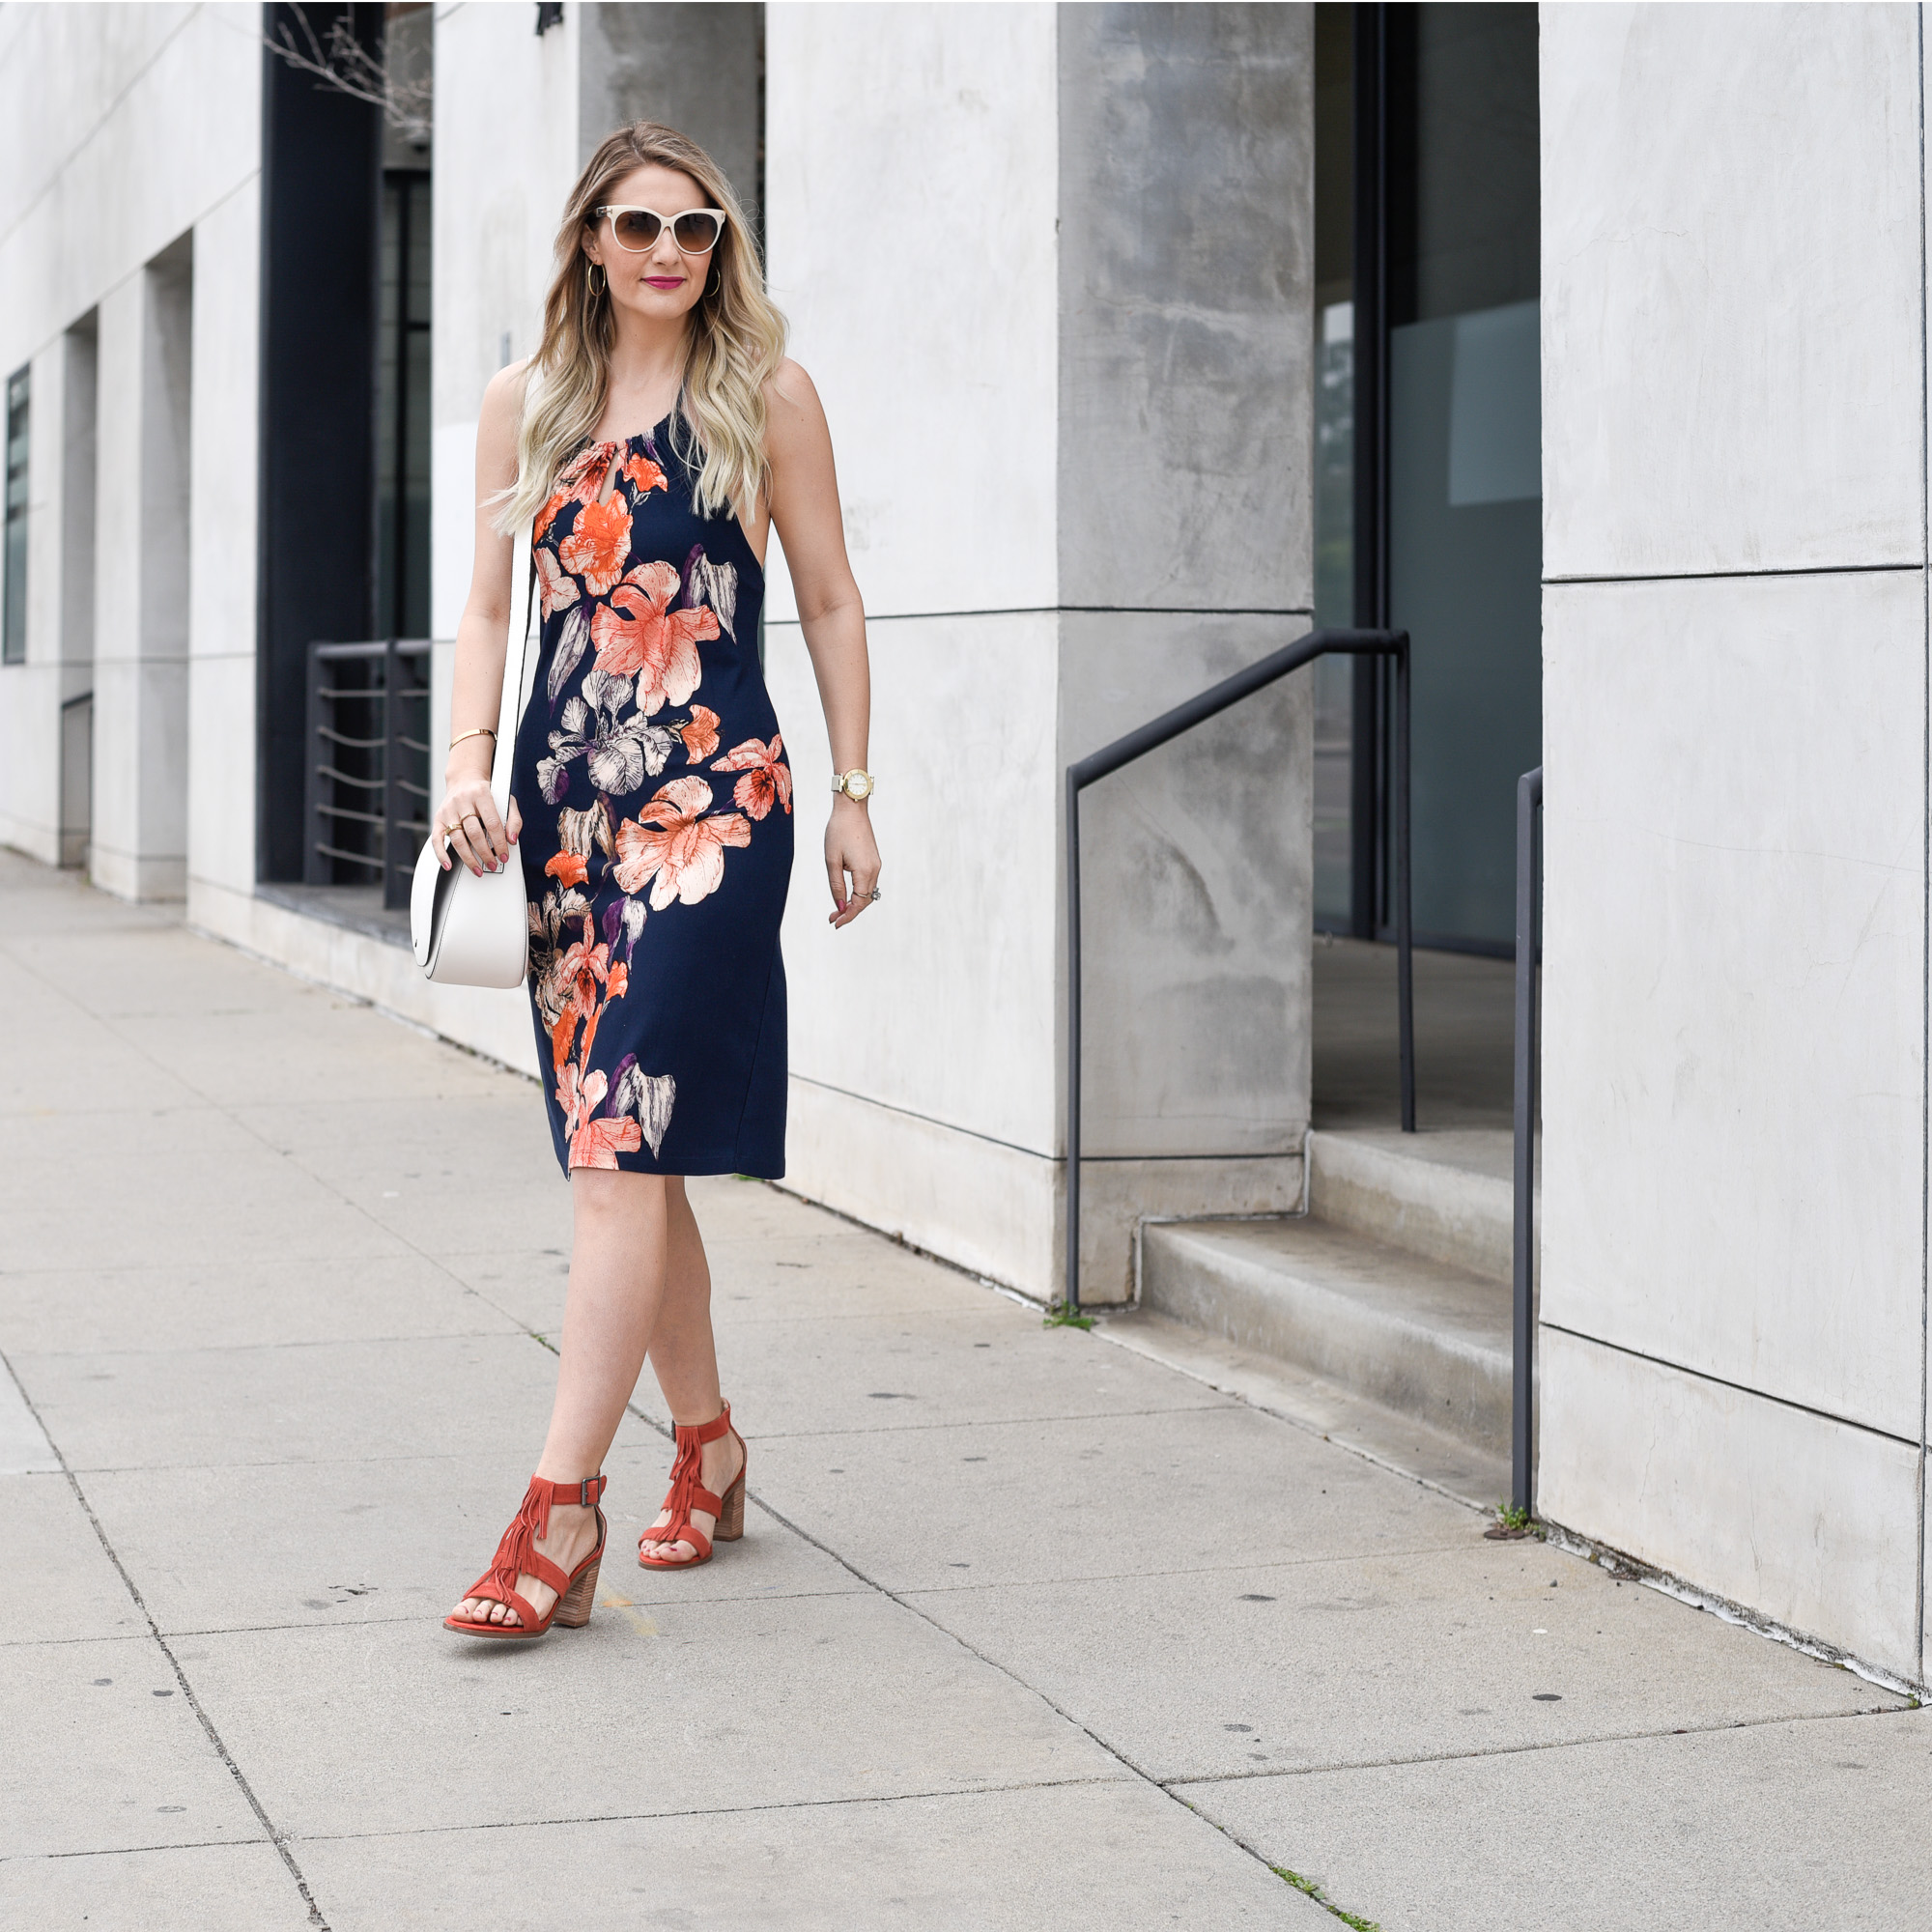 Blue and orange floral dress from a iconic island lifestyle brand. 